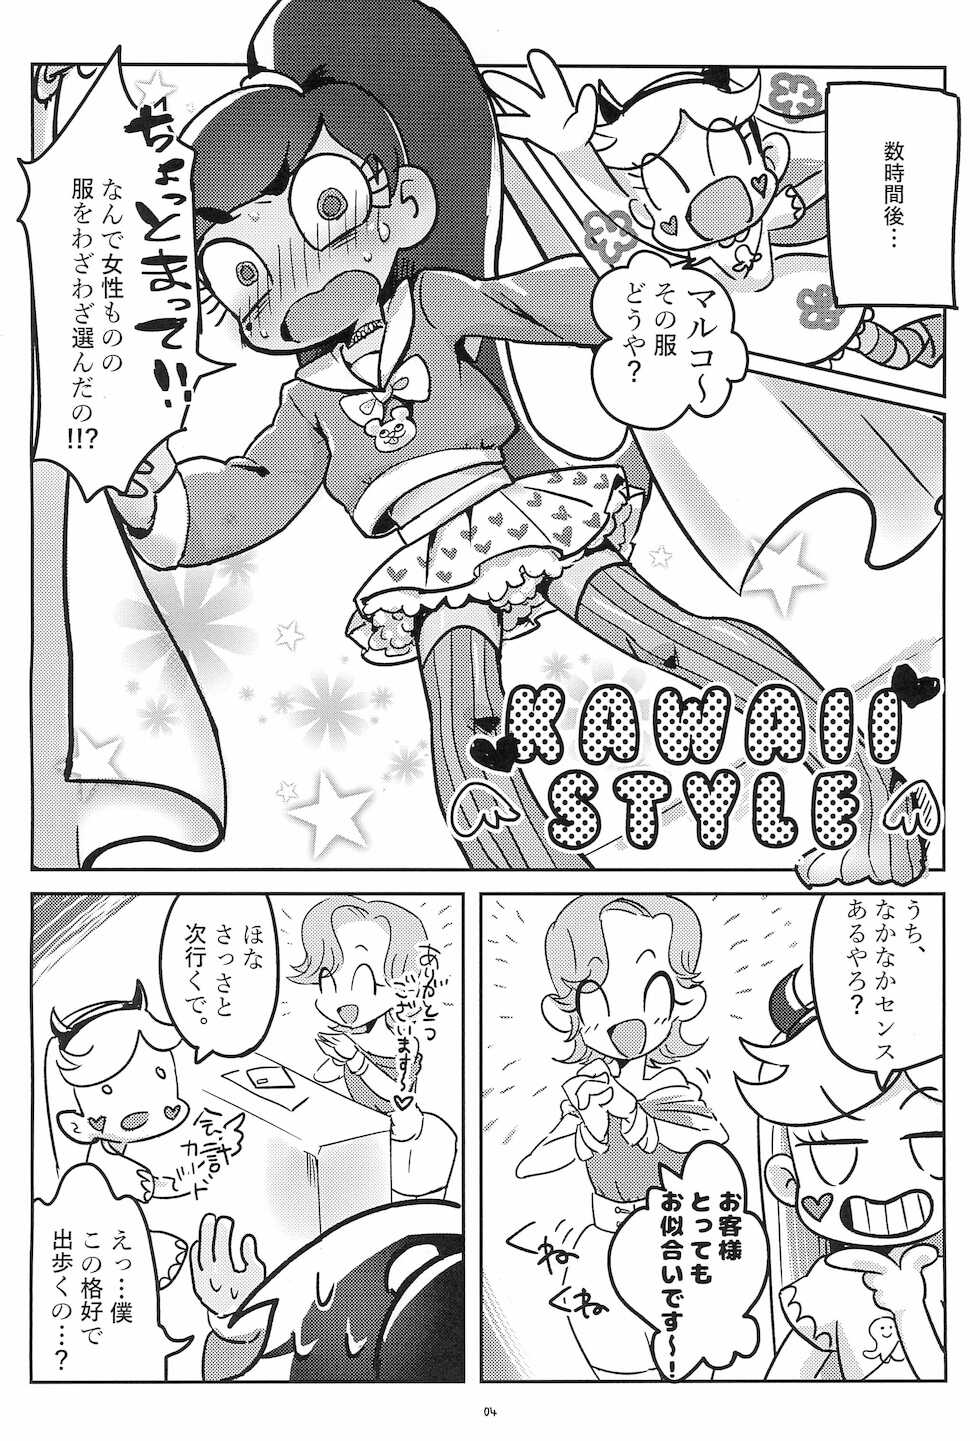 (C92) ["AAA" UDON SHOP (Moccha, Hanya)] Fashion MONSTER Party (Star vs. The Forces of Evil) - Page 8